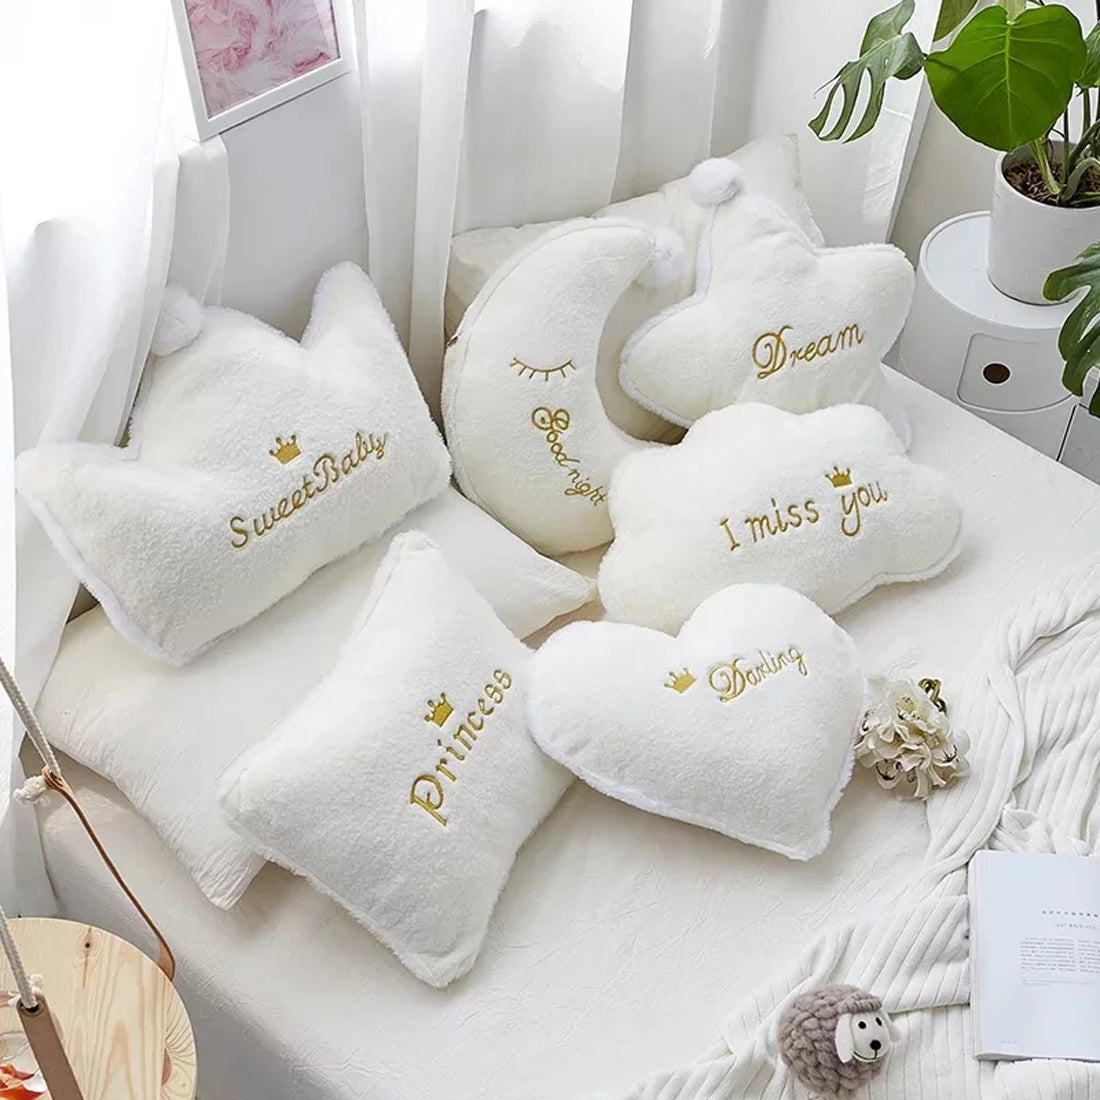  Soft white pillow featuring "good night" message for sweet dreams.